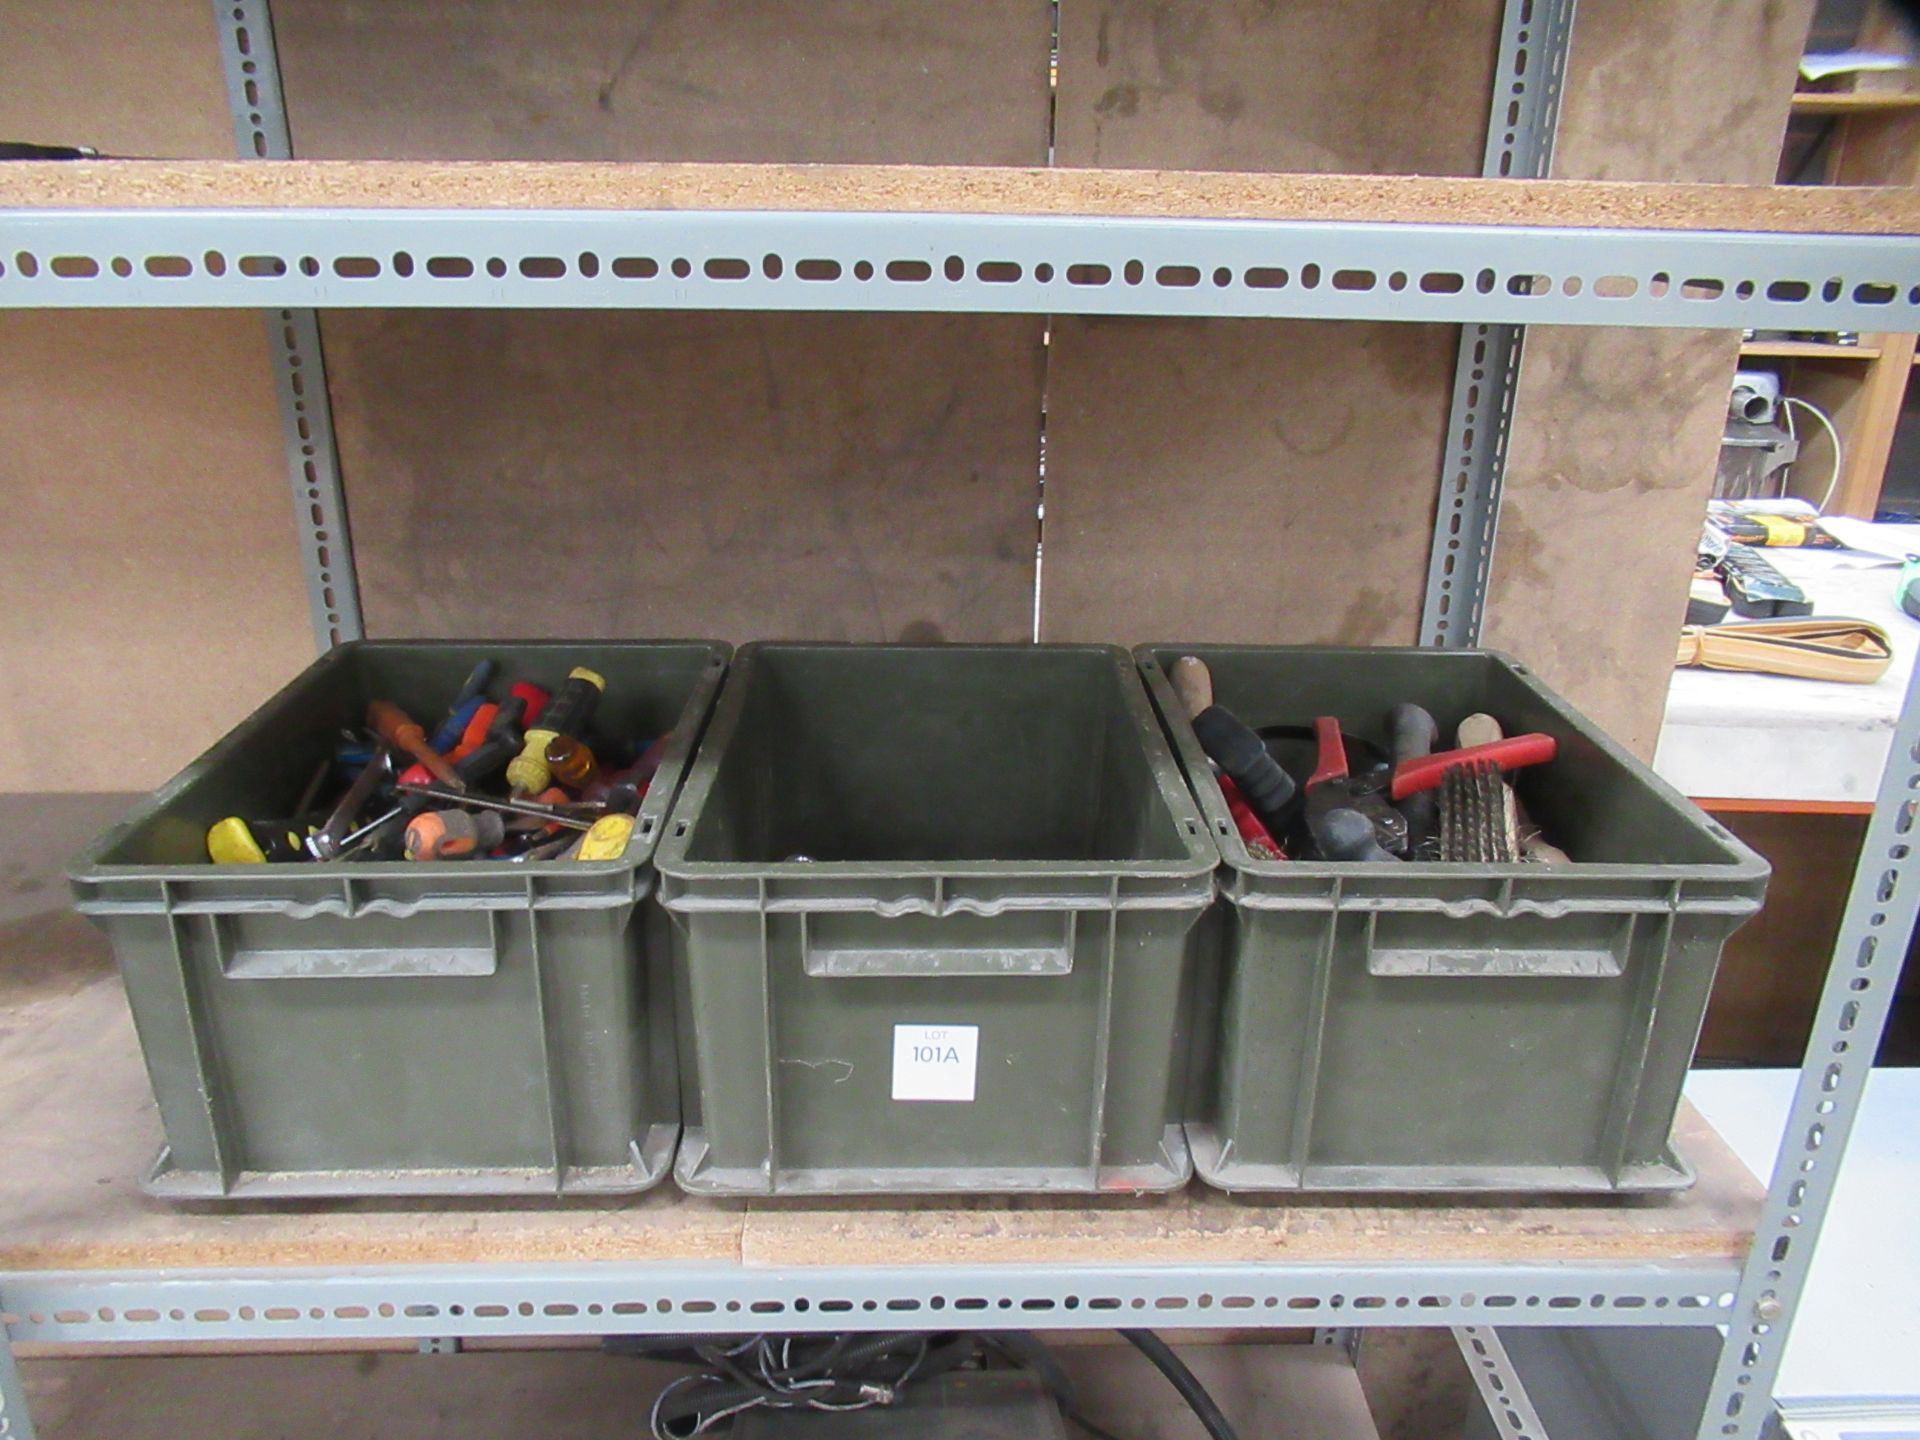 3x tubs of various garage hand tools to include screwdrivers, sockets etc